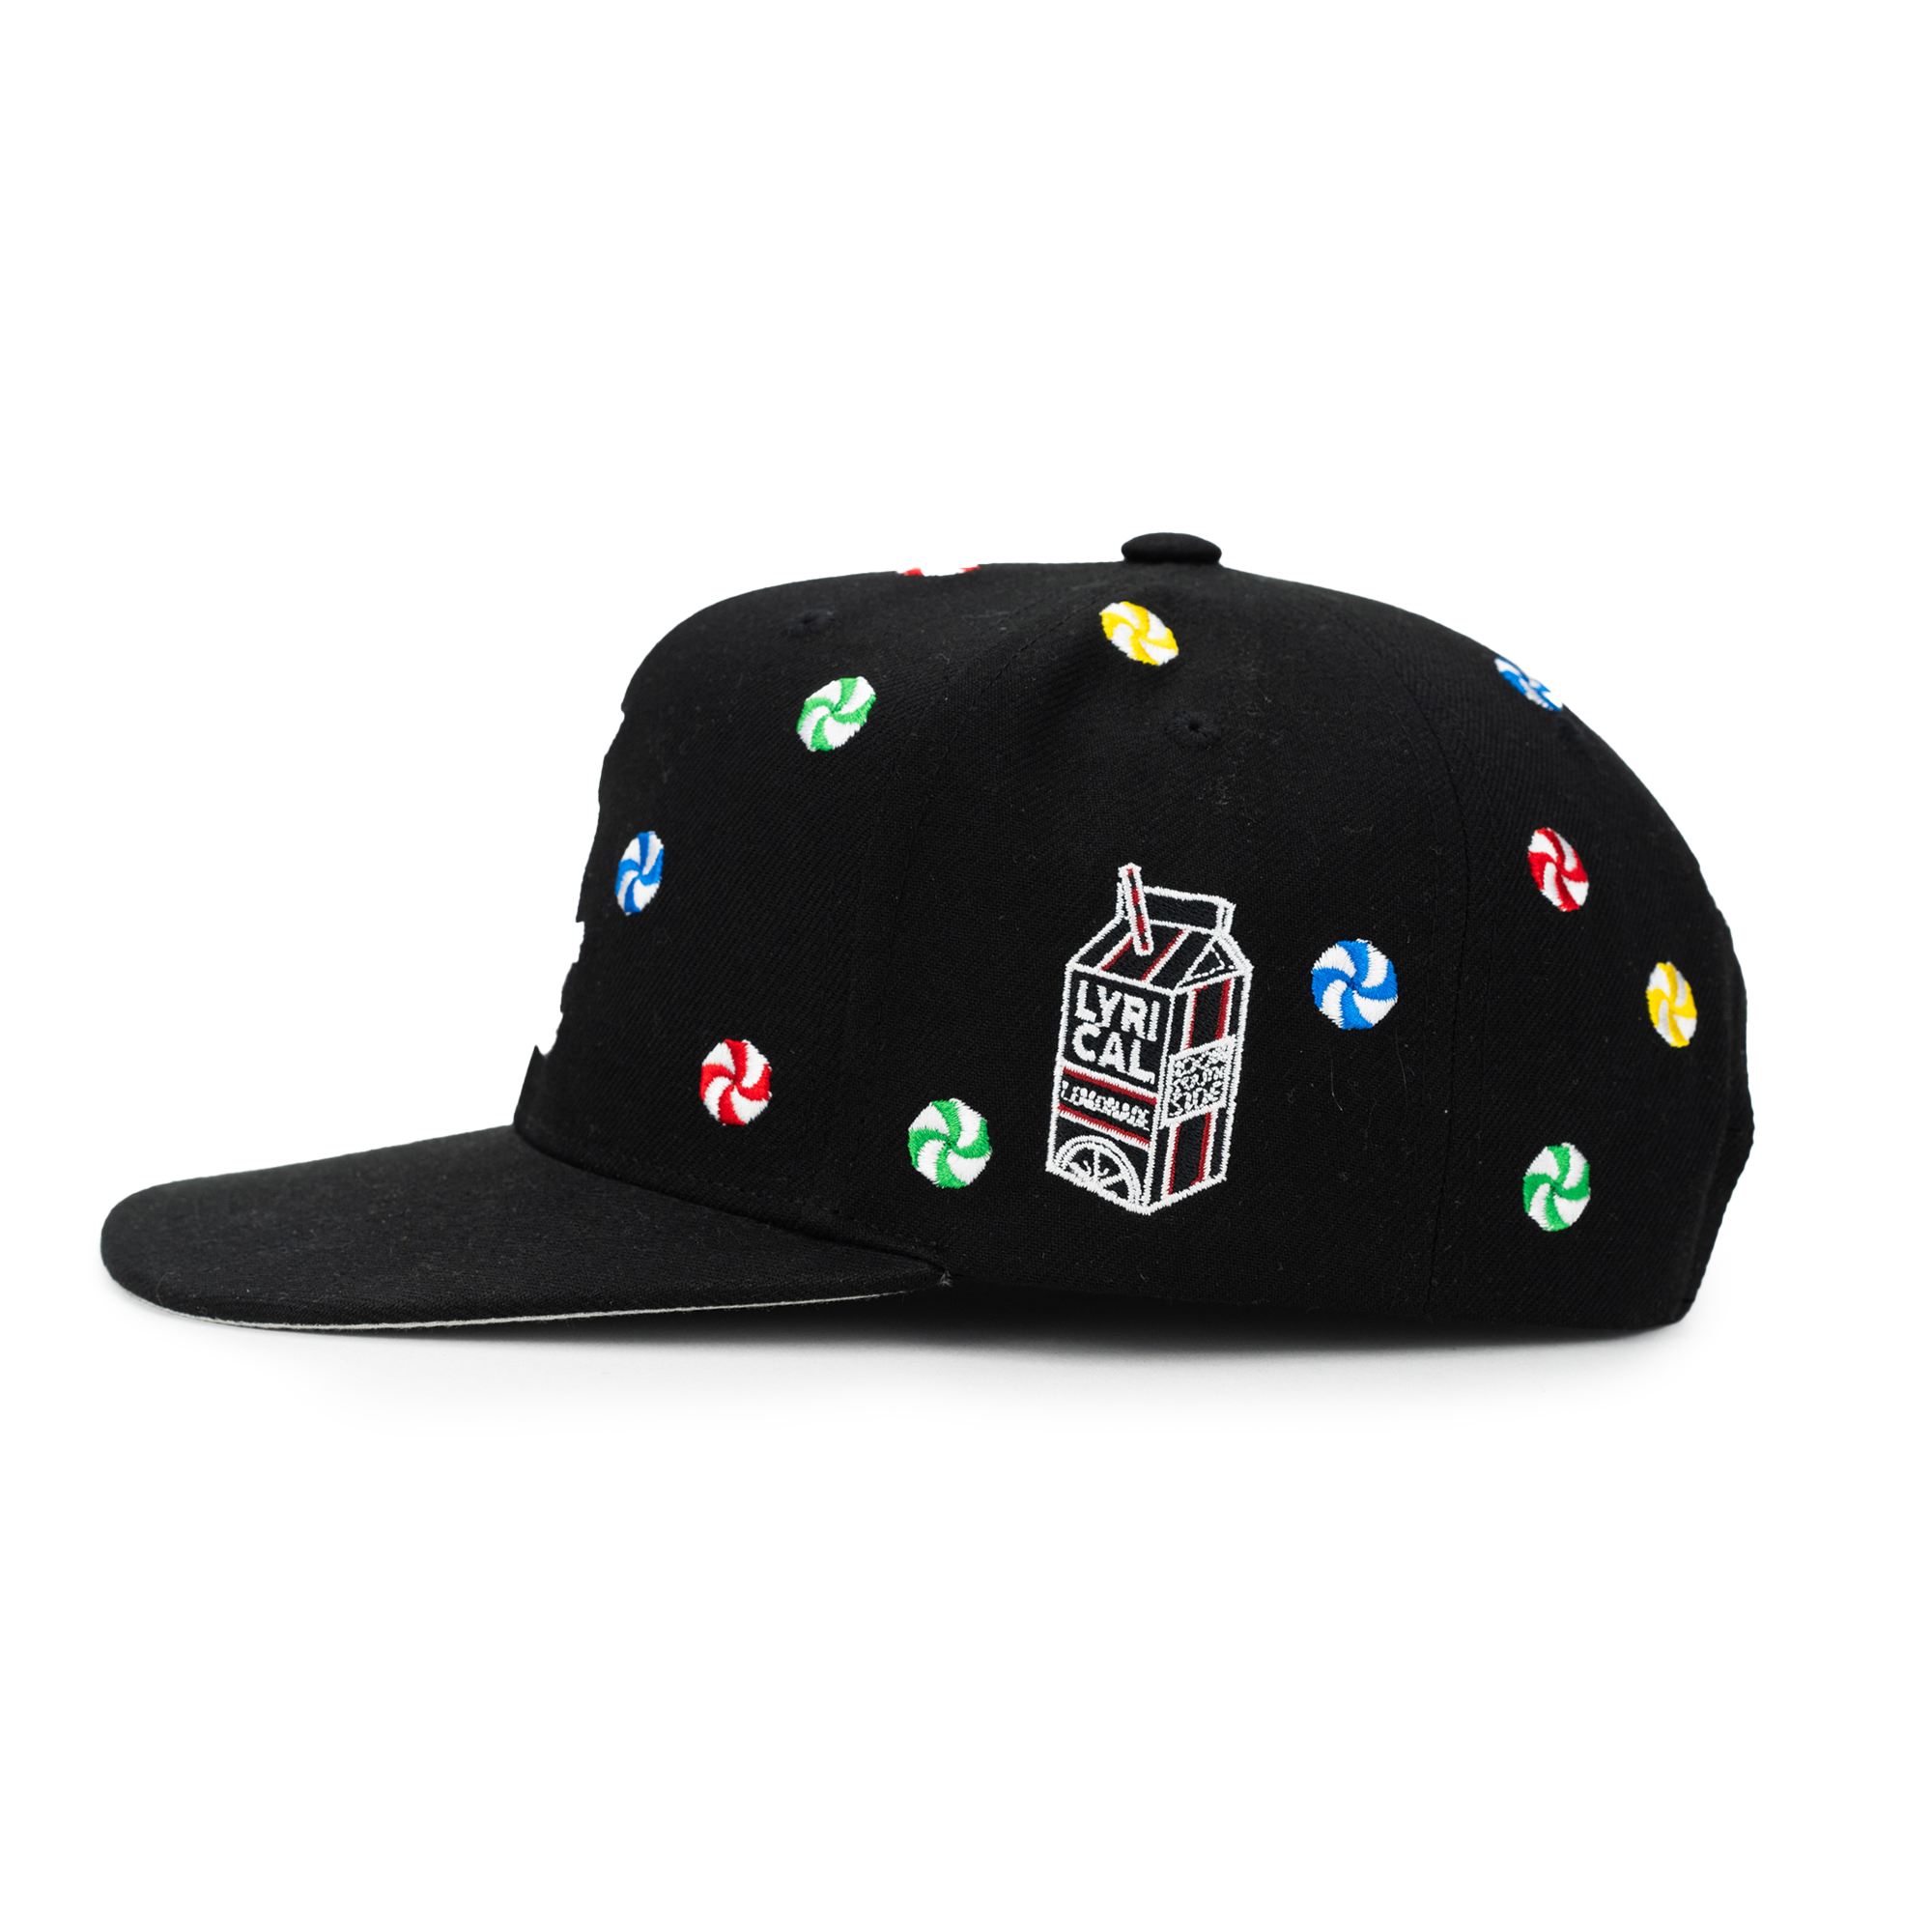 LL x White Sox Snapback right.png